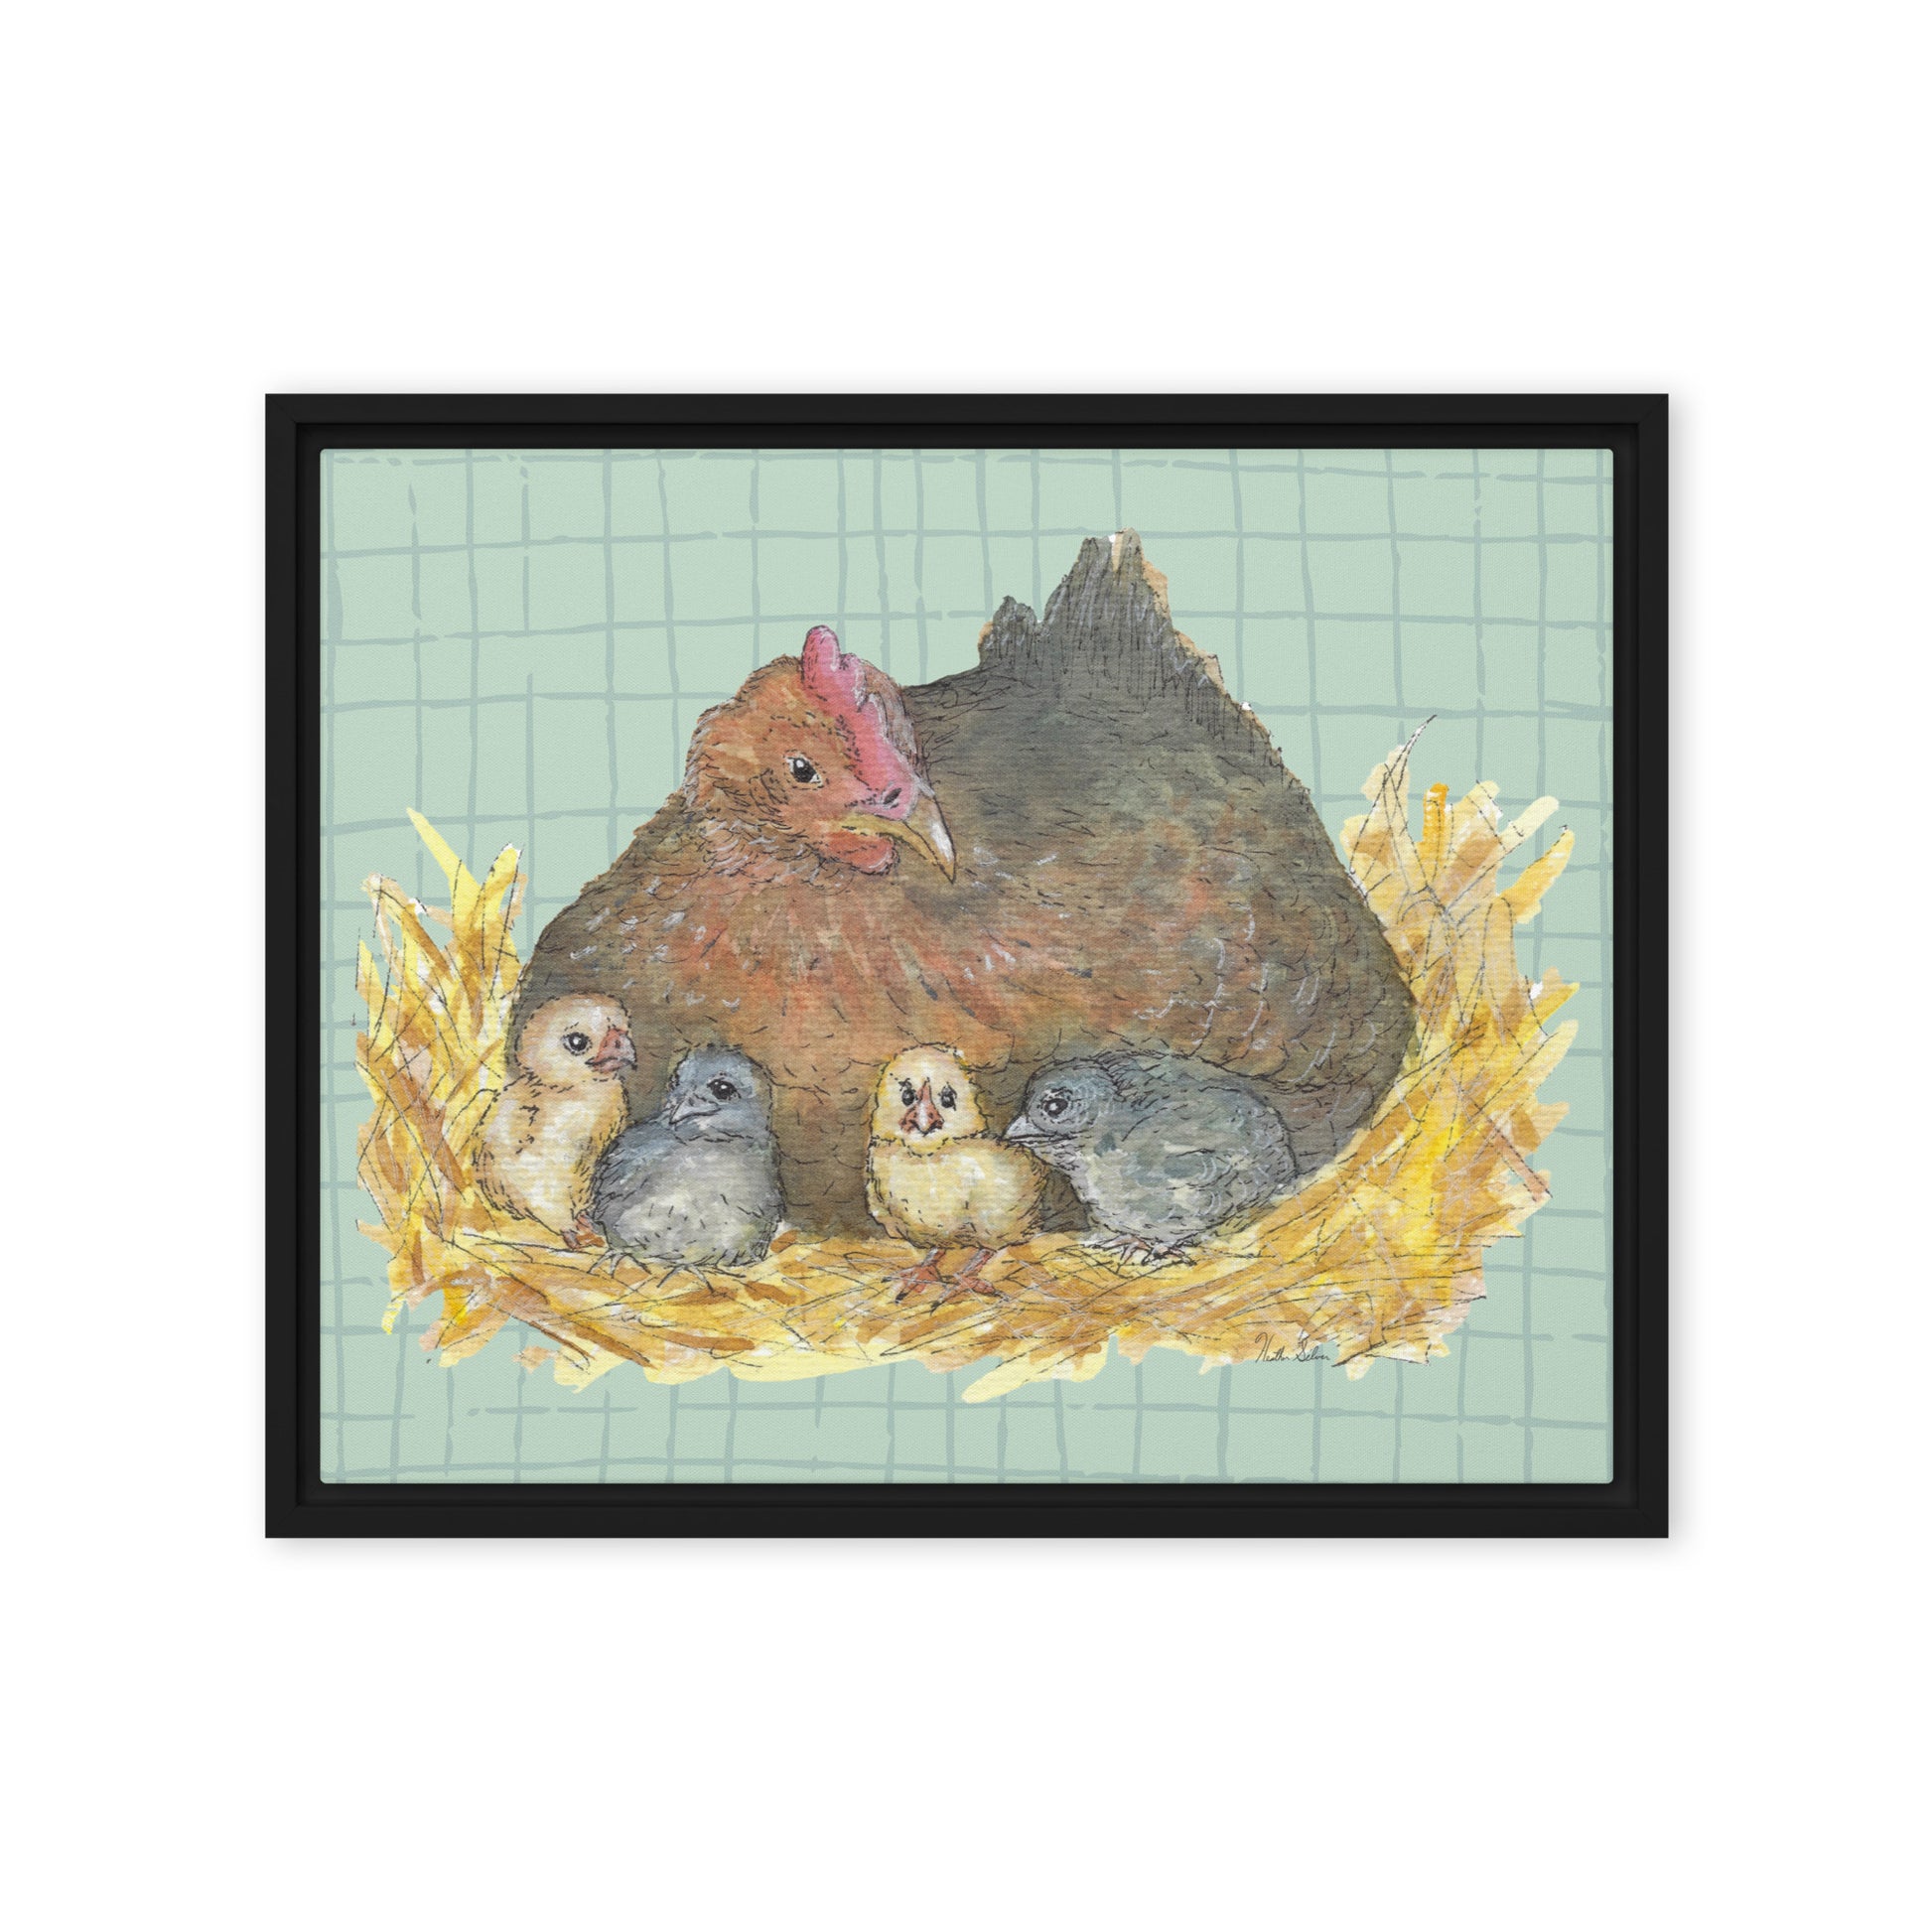 16 by 20 inch Mother Hen Floating Frame Canvas Wall Art. Heather Silver's watercolor painting, Mother Hen, with a green crosshatched background, printed on a stretched canvas and framed with a dark black pine frame. Hanging hardware included.